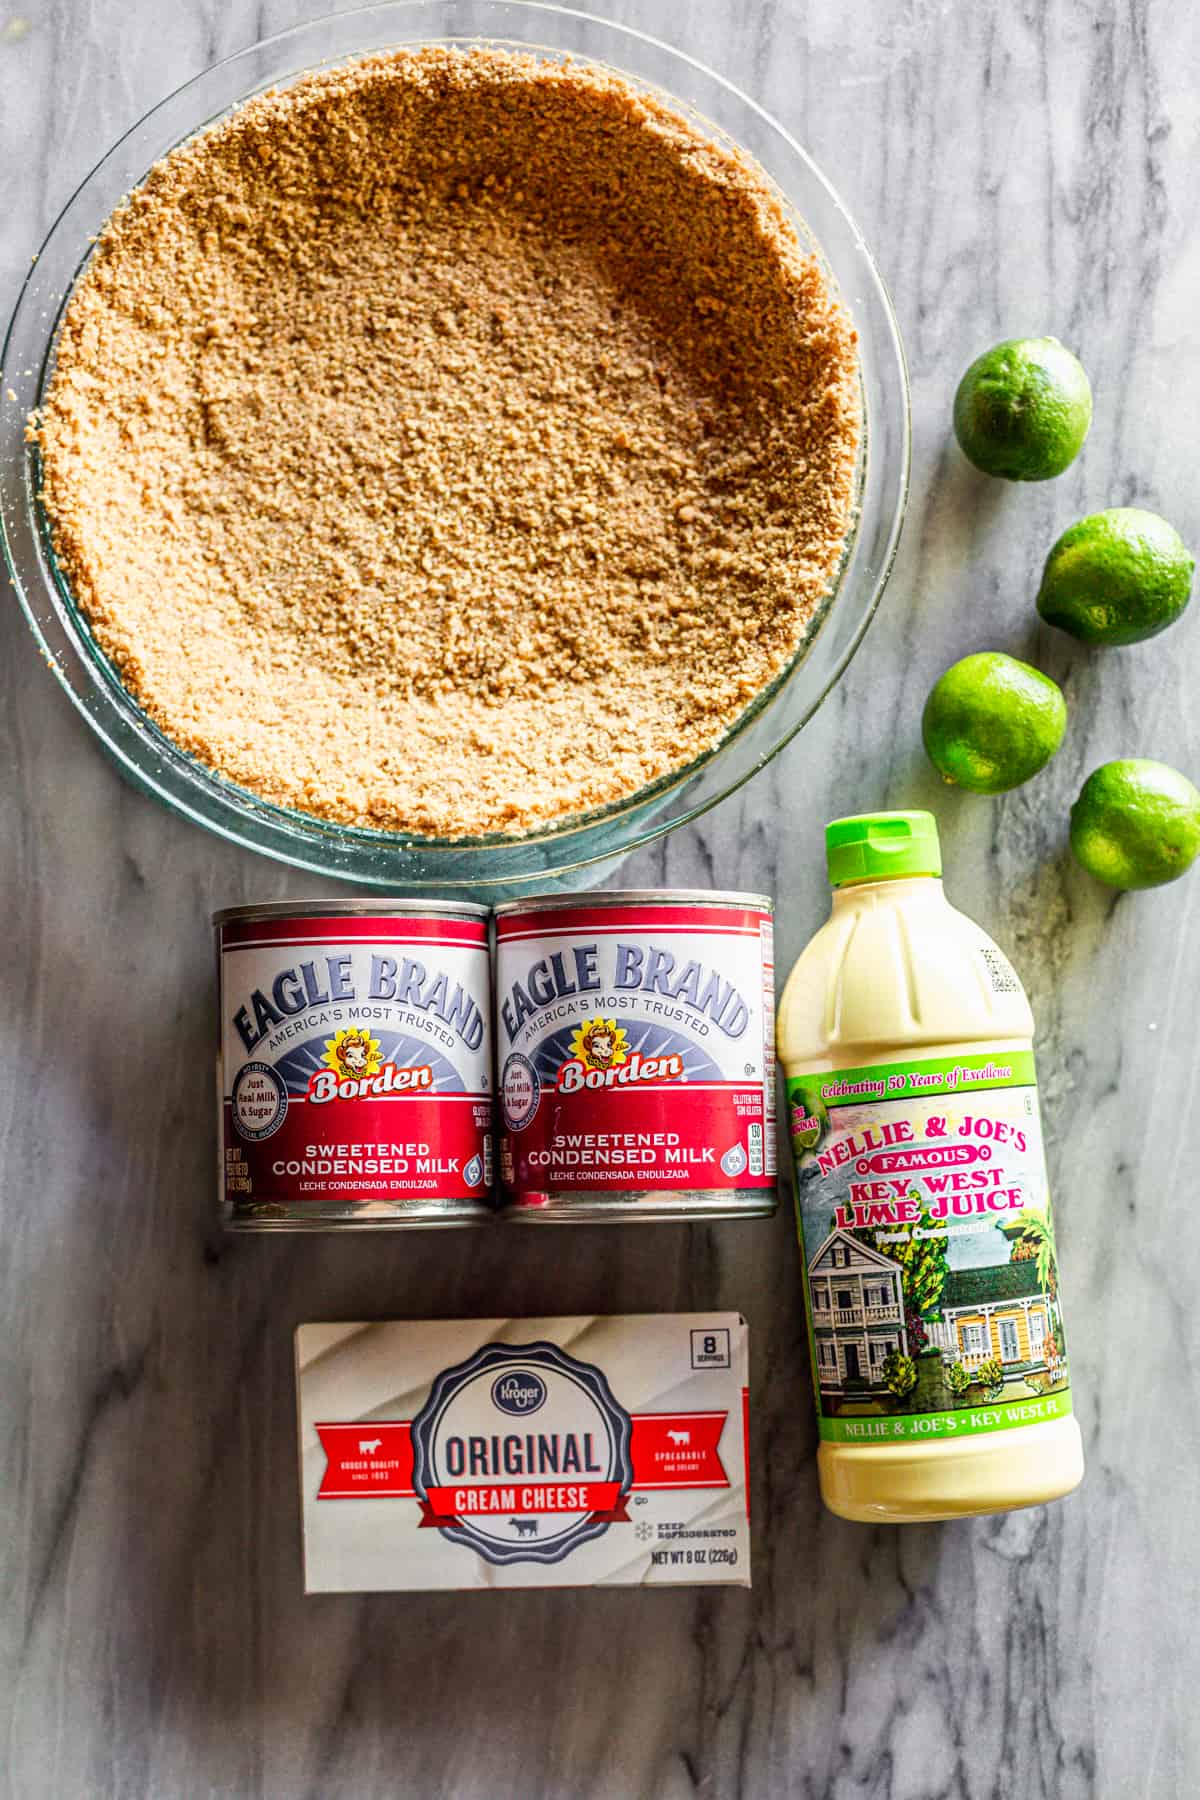 The ingredients needed to make the BEST Key Lime Pie recipe: Key Lime Juice, Graham Cracker Crust, Lime Zest, Sweetened Condensed Milk, and Cream Cheese.